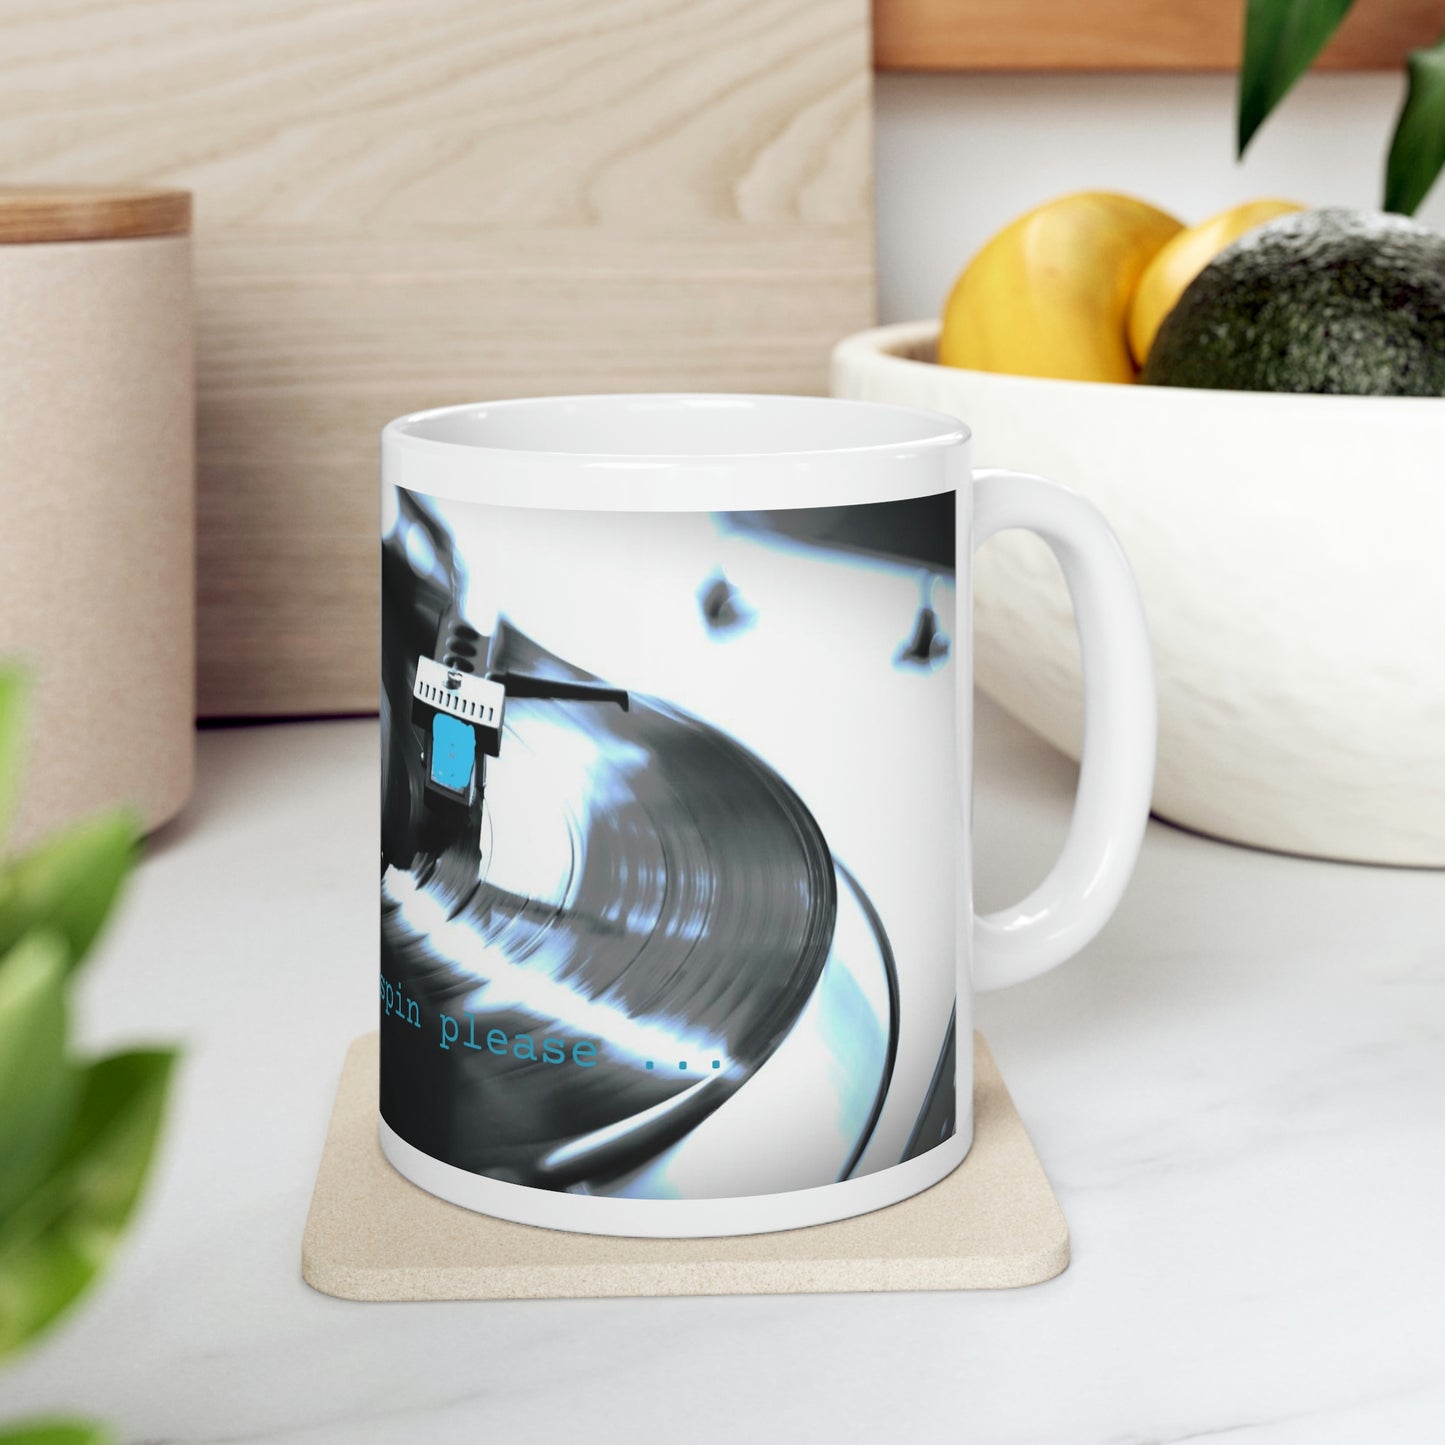 Another cup and another spin please ... - Blue Record Player - Ceramic Mug 11oz - Limited Edition